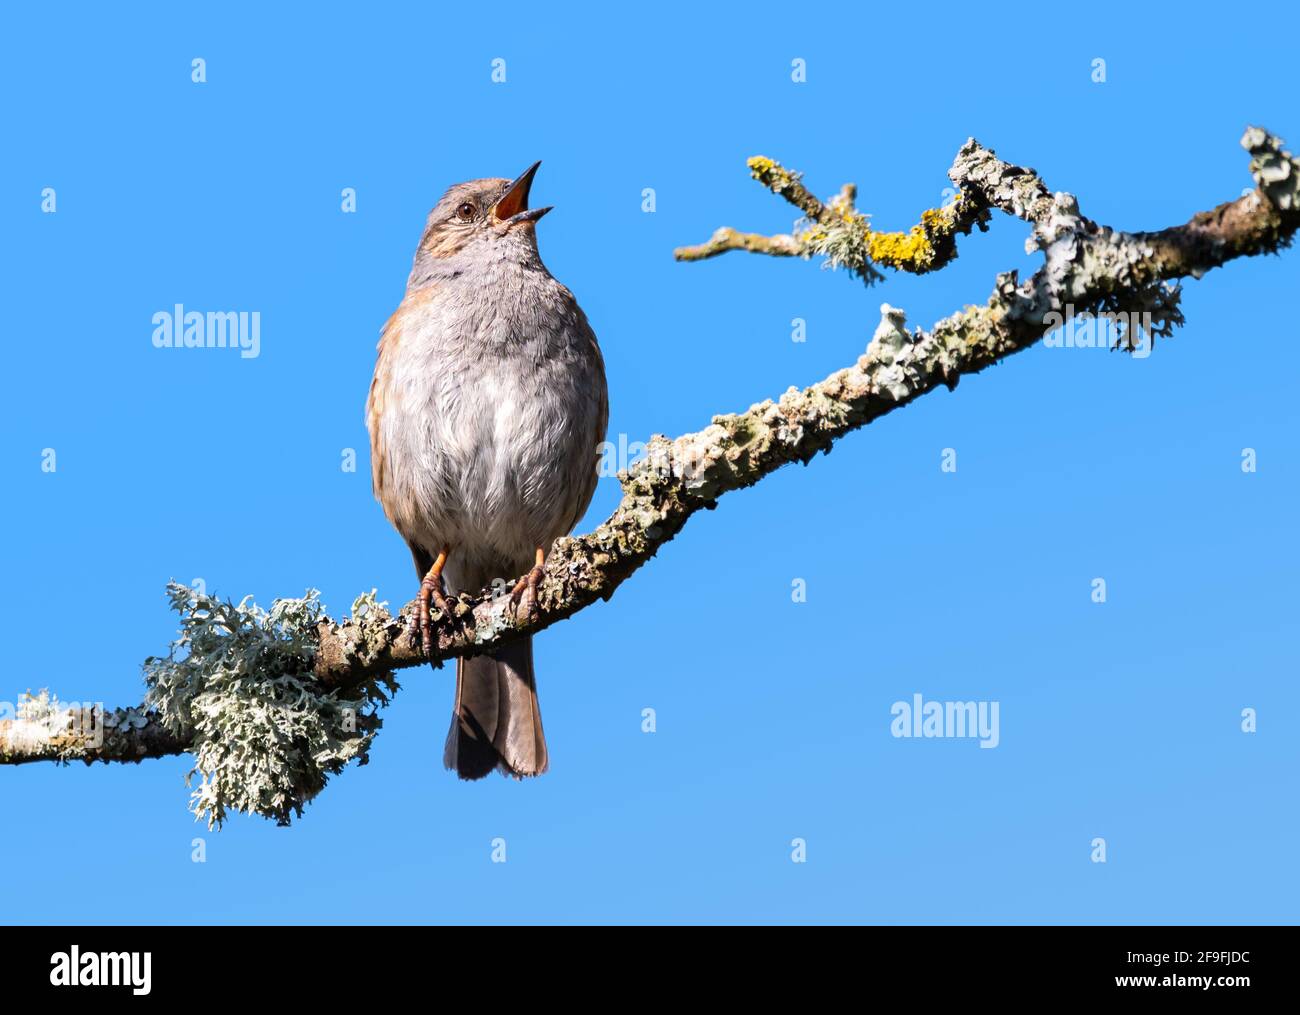 Adult Dunnock bird (Prunella modularis) calling with beak open, perched on a branch in Spring in West Sussex, England, UK. Stock Photo